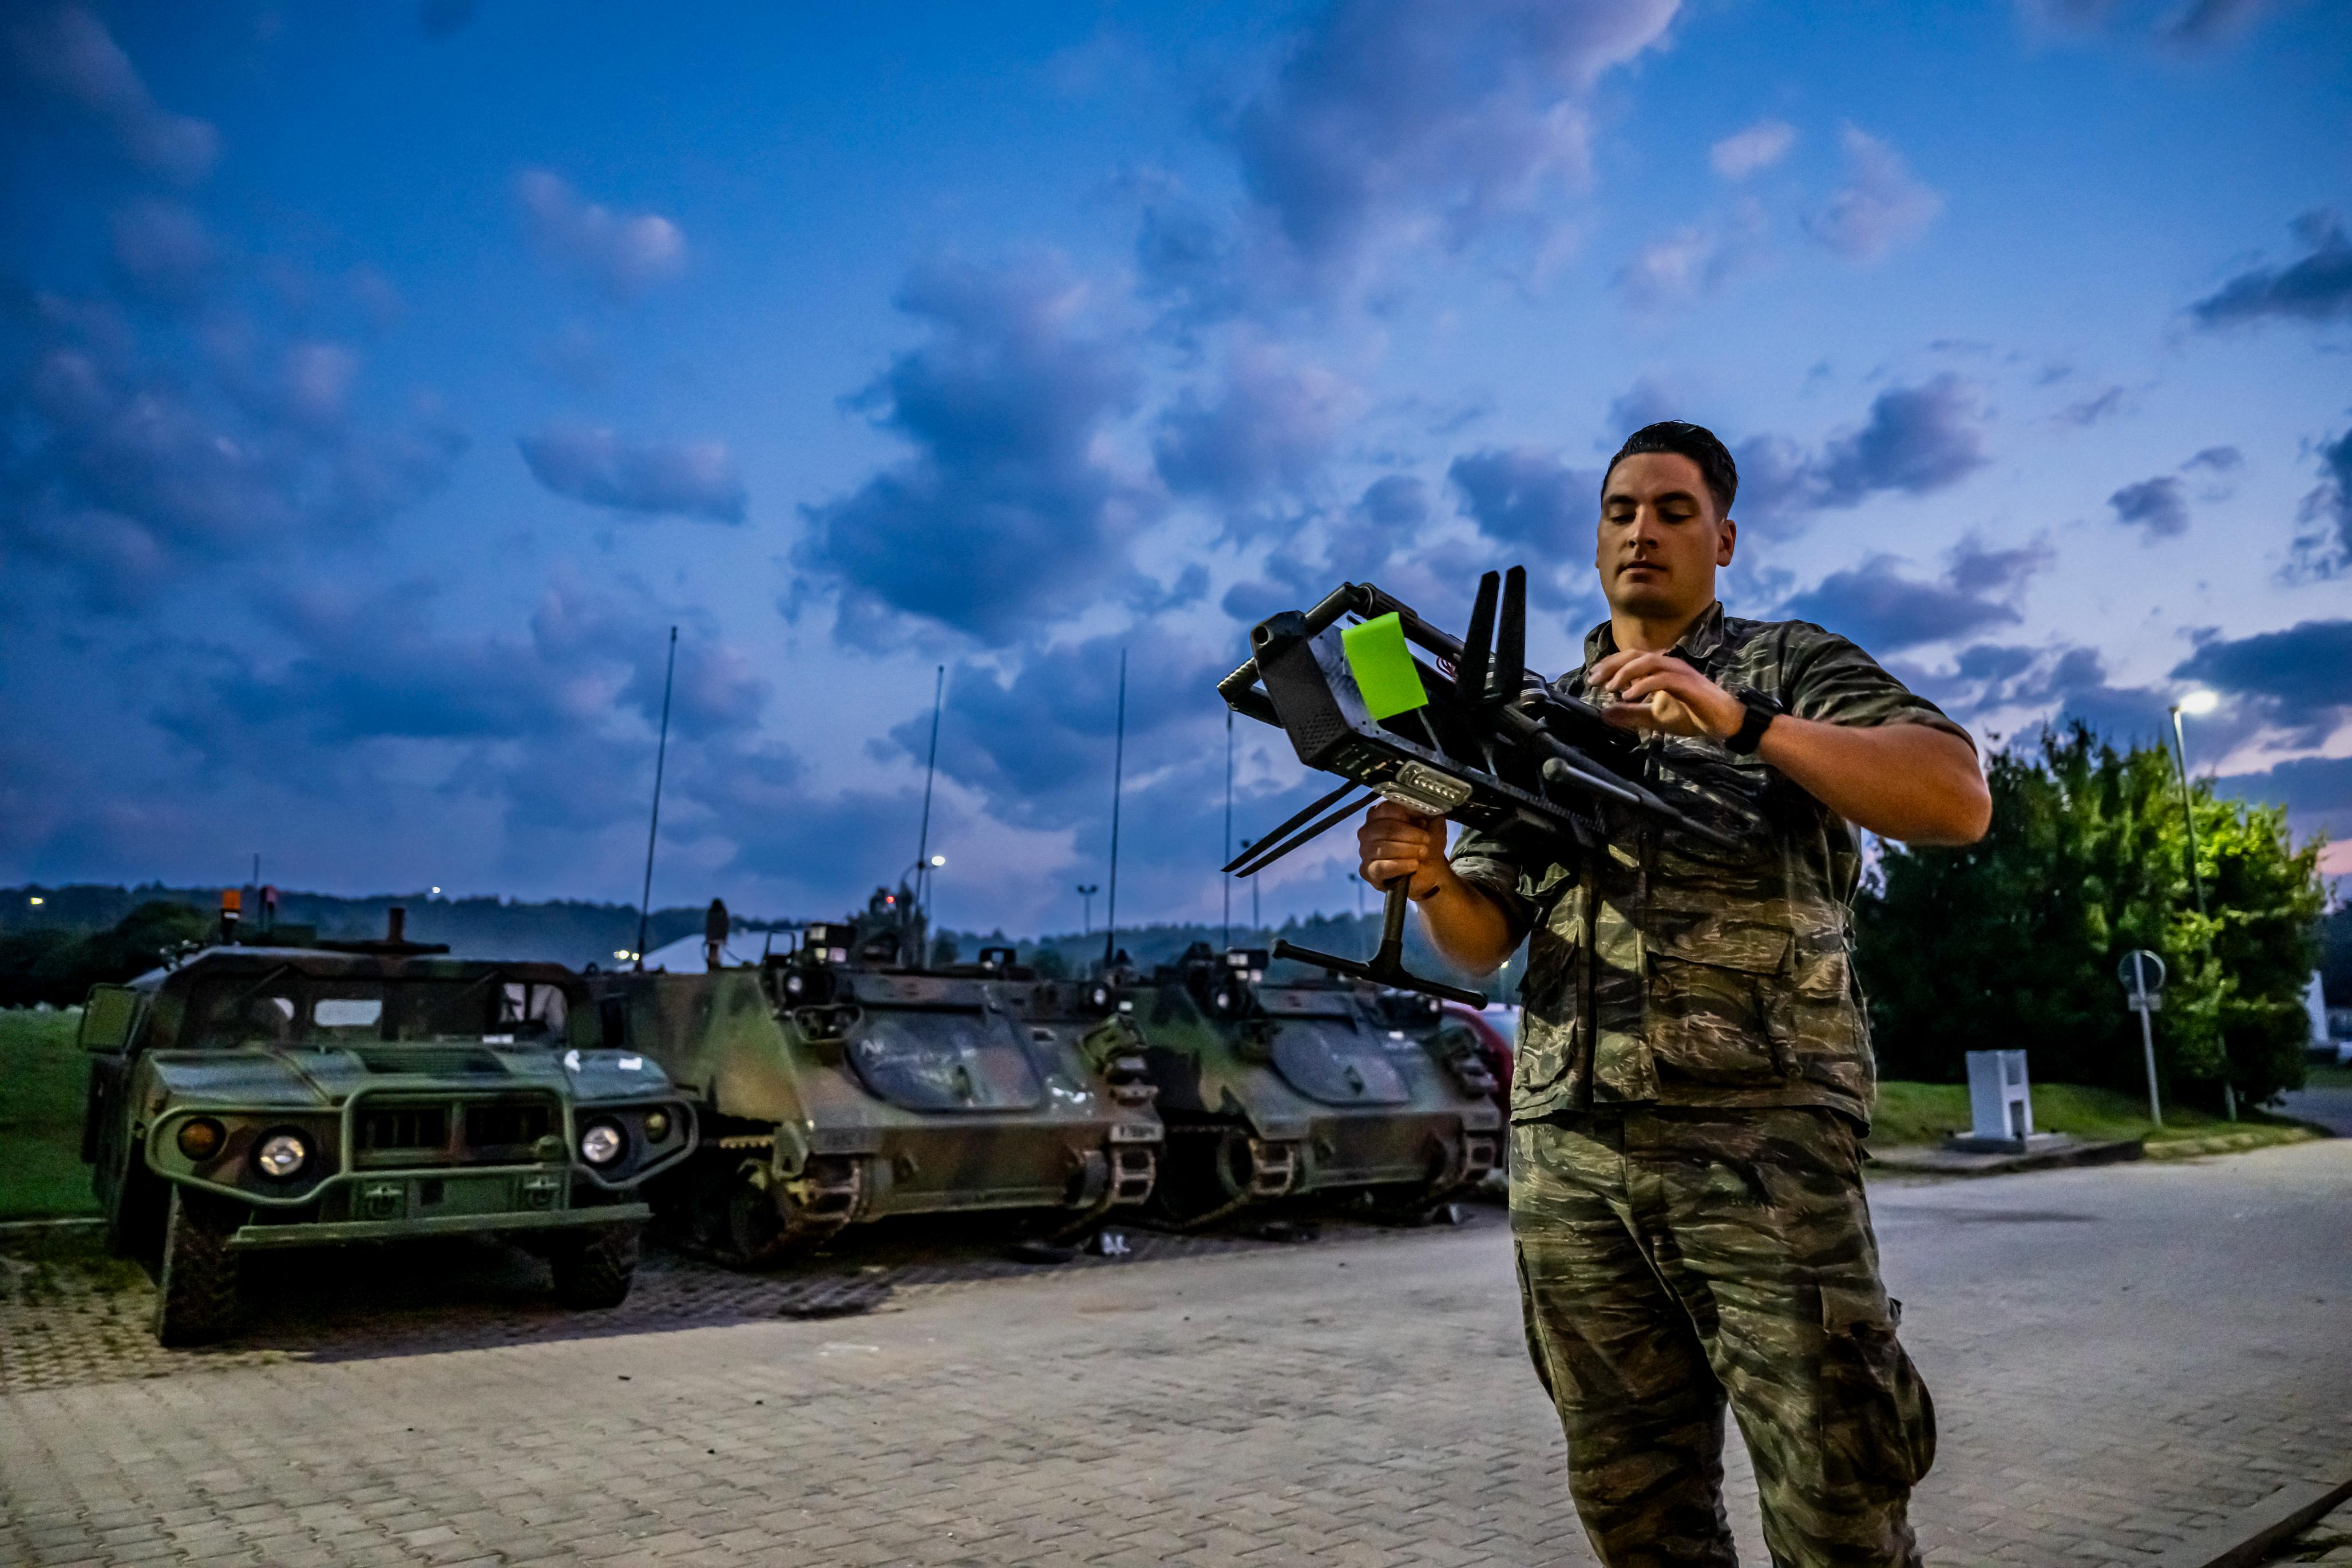 U.S. Army Sgt. Connor Piegaro, a Small Unmanned Aerial System master trainer with the 1st Battalion of the 4th Infantry Regiment, unfolds a TS-M800 II drone to demonstrate its capabilities during Saber Junction 23 at the Joint Multinational Readiness Center near Hohenfels, Germany, Sept. 11, 2023.